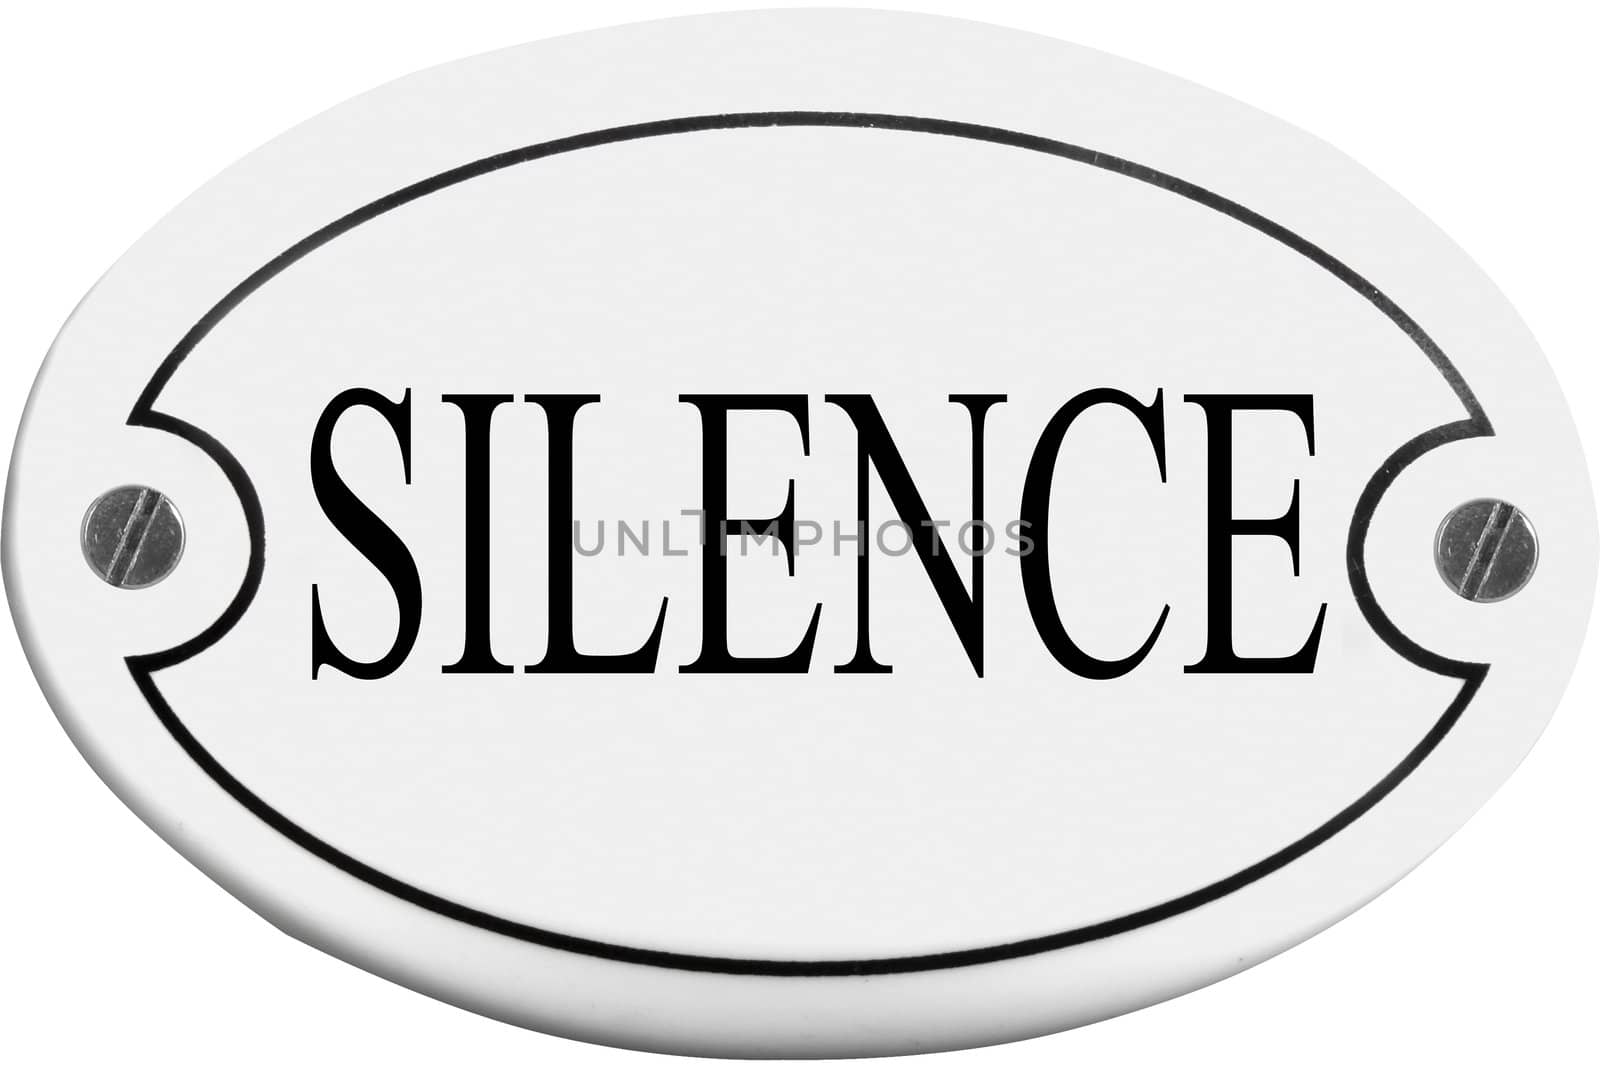 Old-fashioned door name plate  with text silence